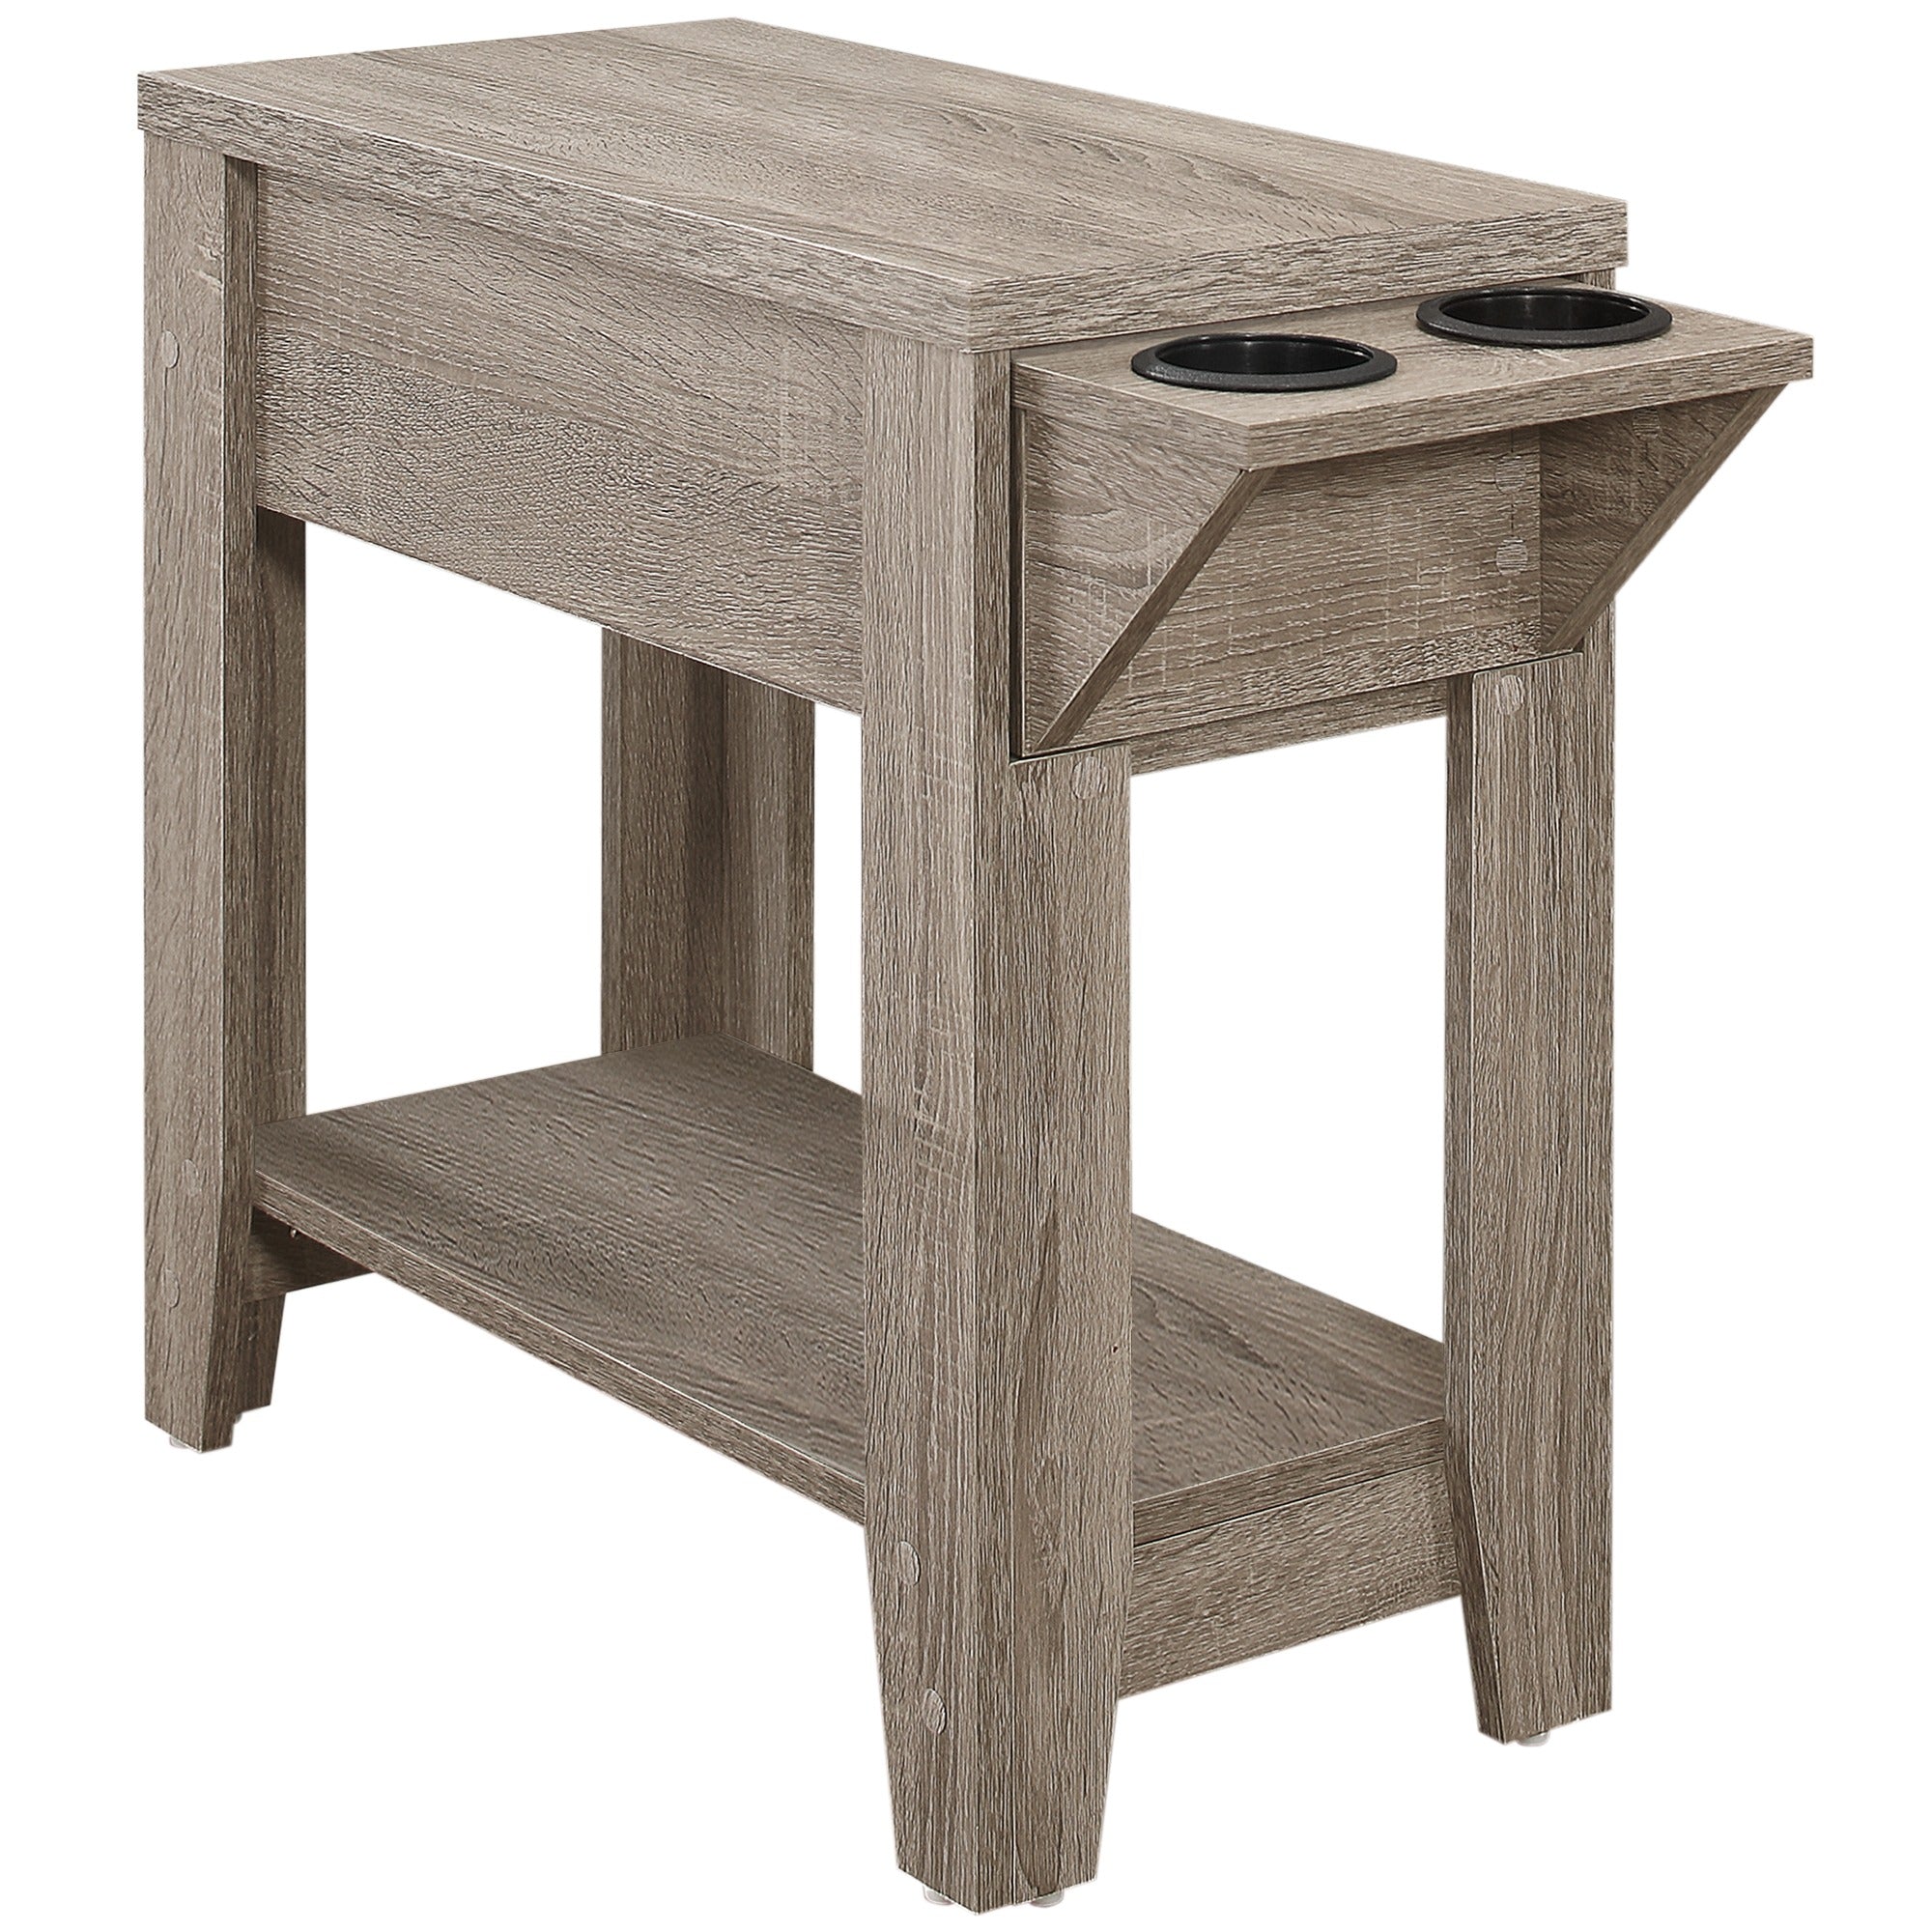 ACCENT TABLE - 23"H / ESPRESSO WITH A GLASS HOLDER